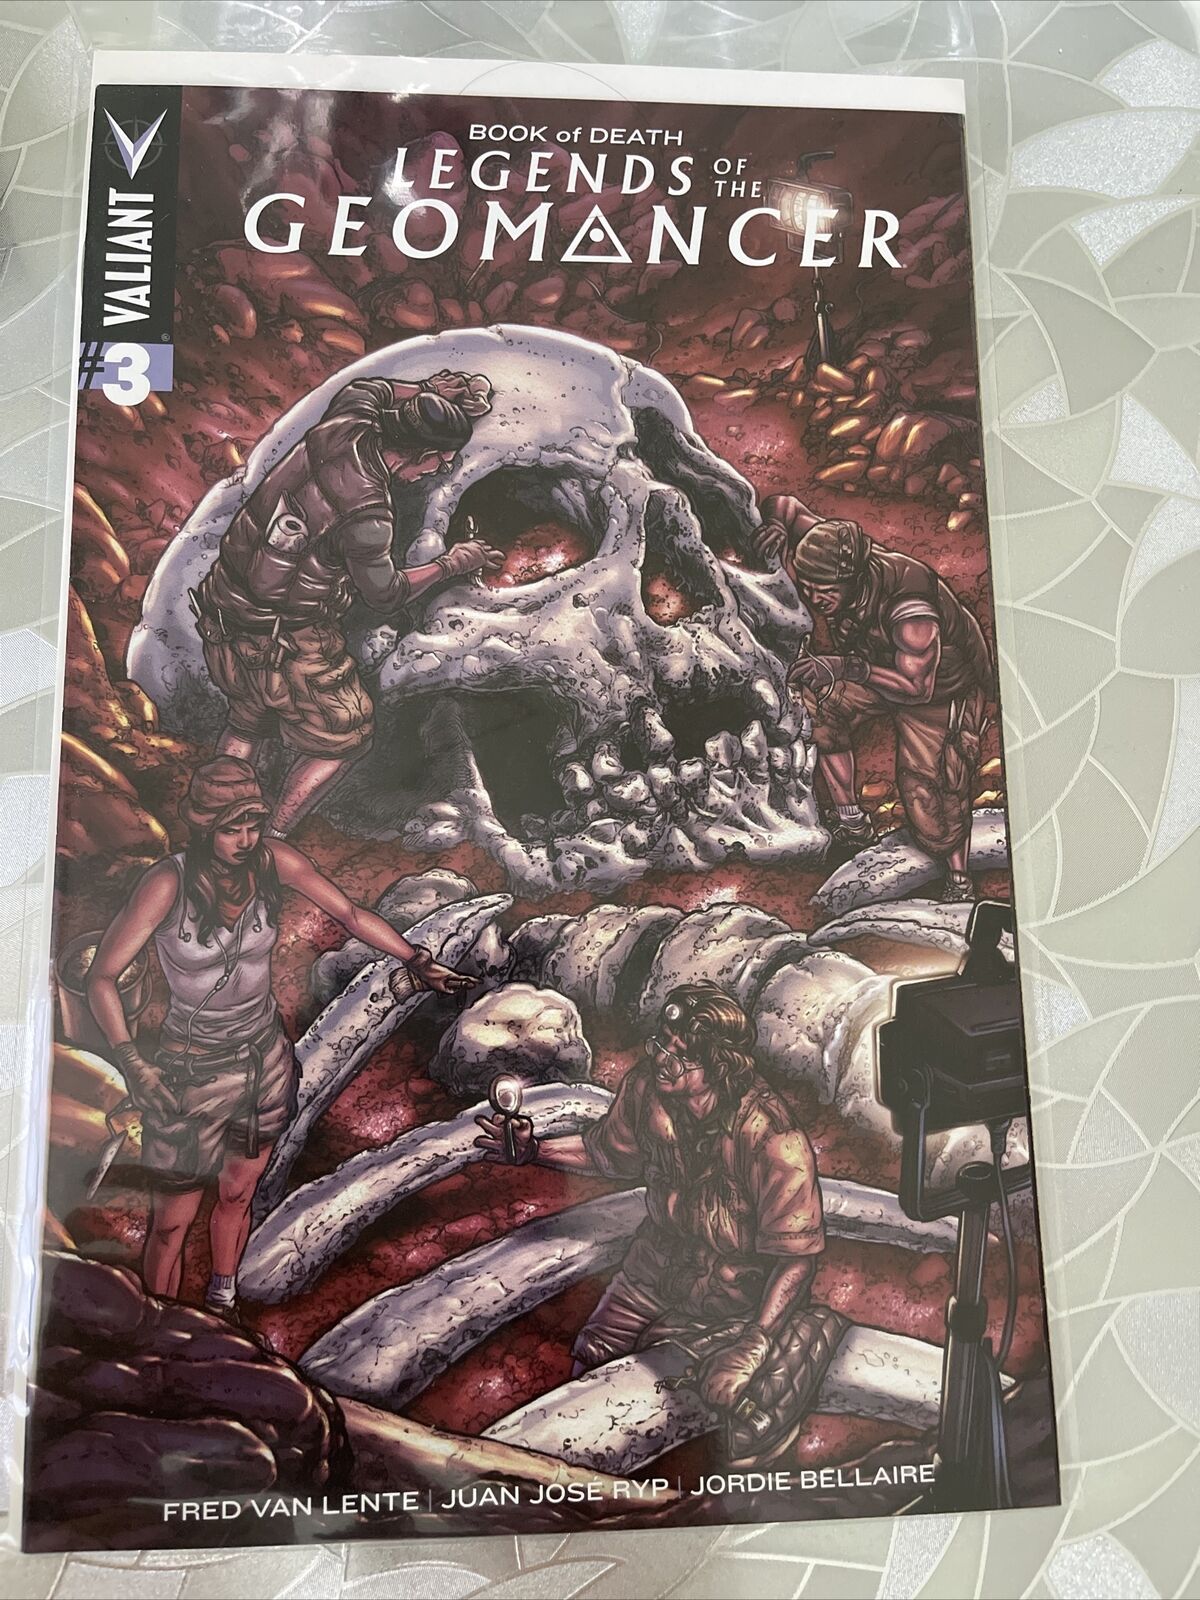 BOOK OF DEATH: LEGENDS OF THE GEOMANCER #3 1:10 RI VARIANT COVER UNREAD